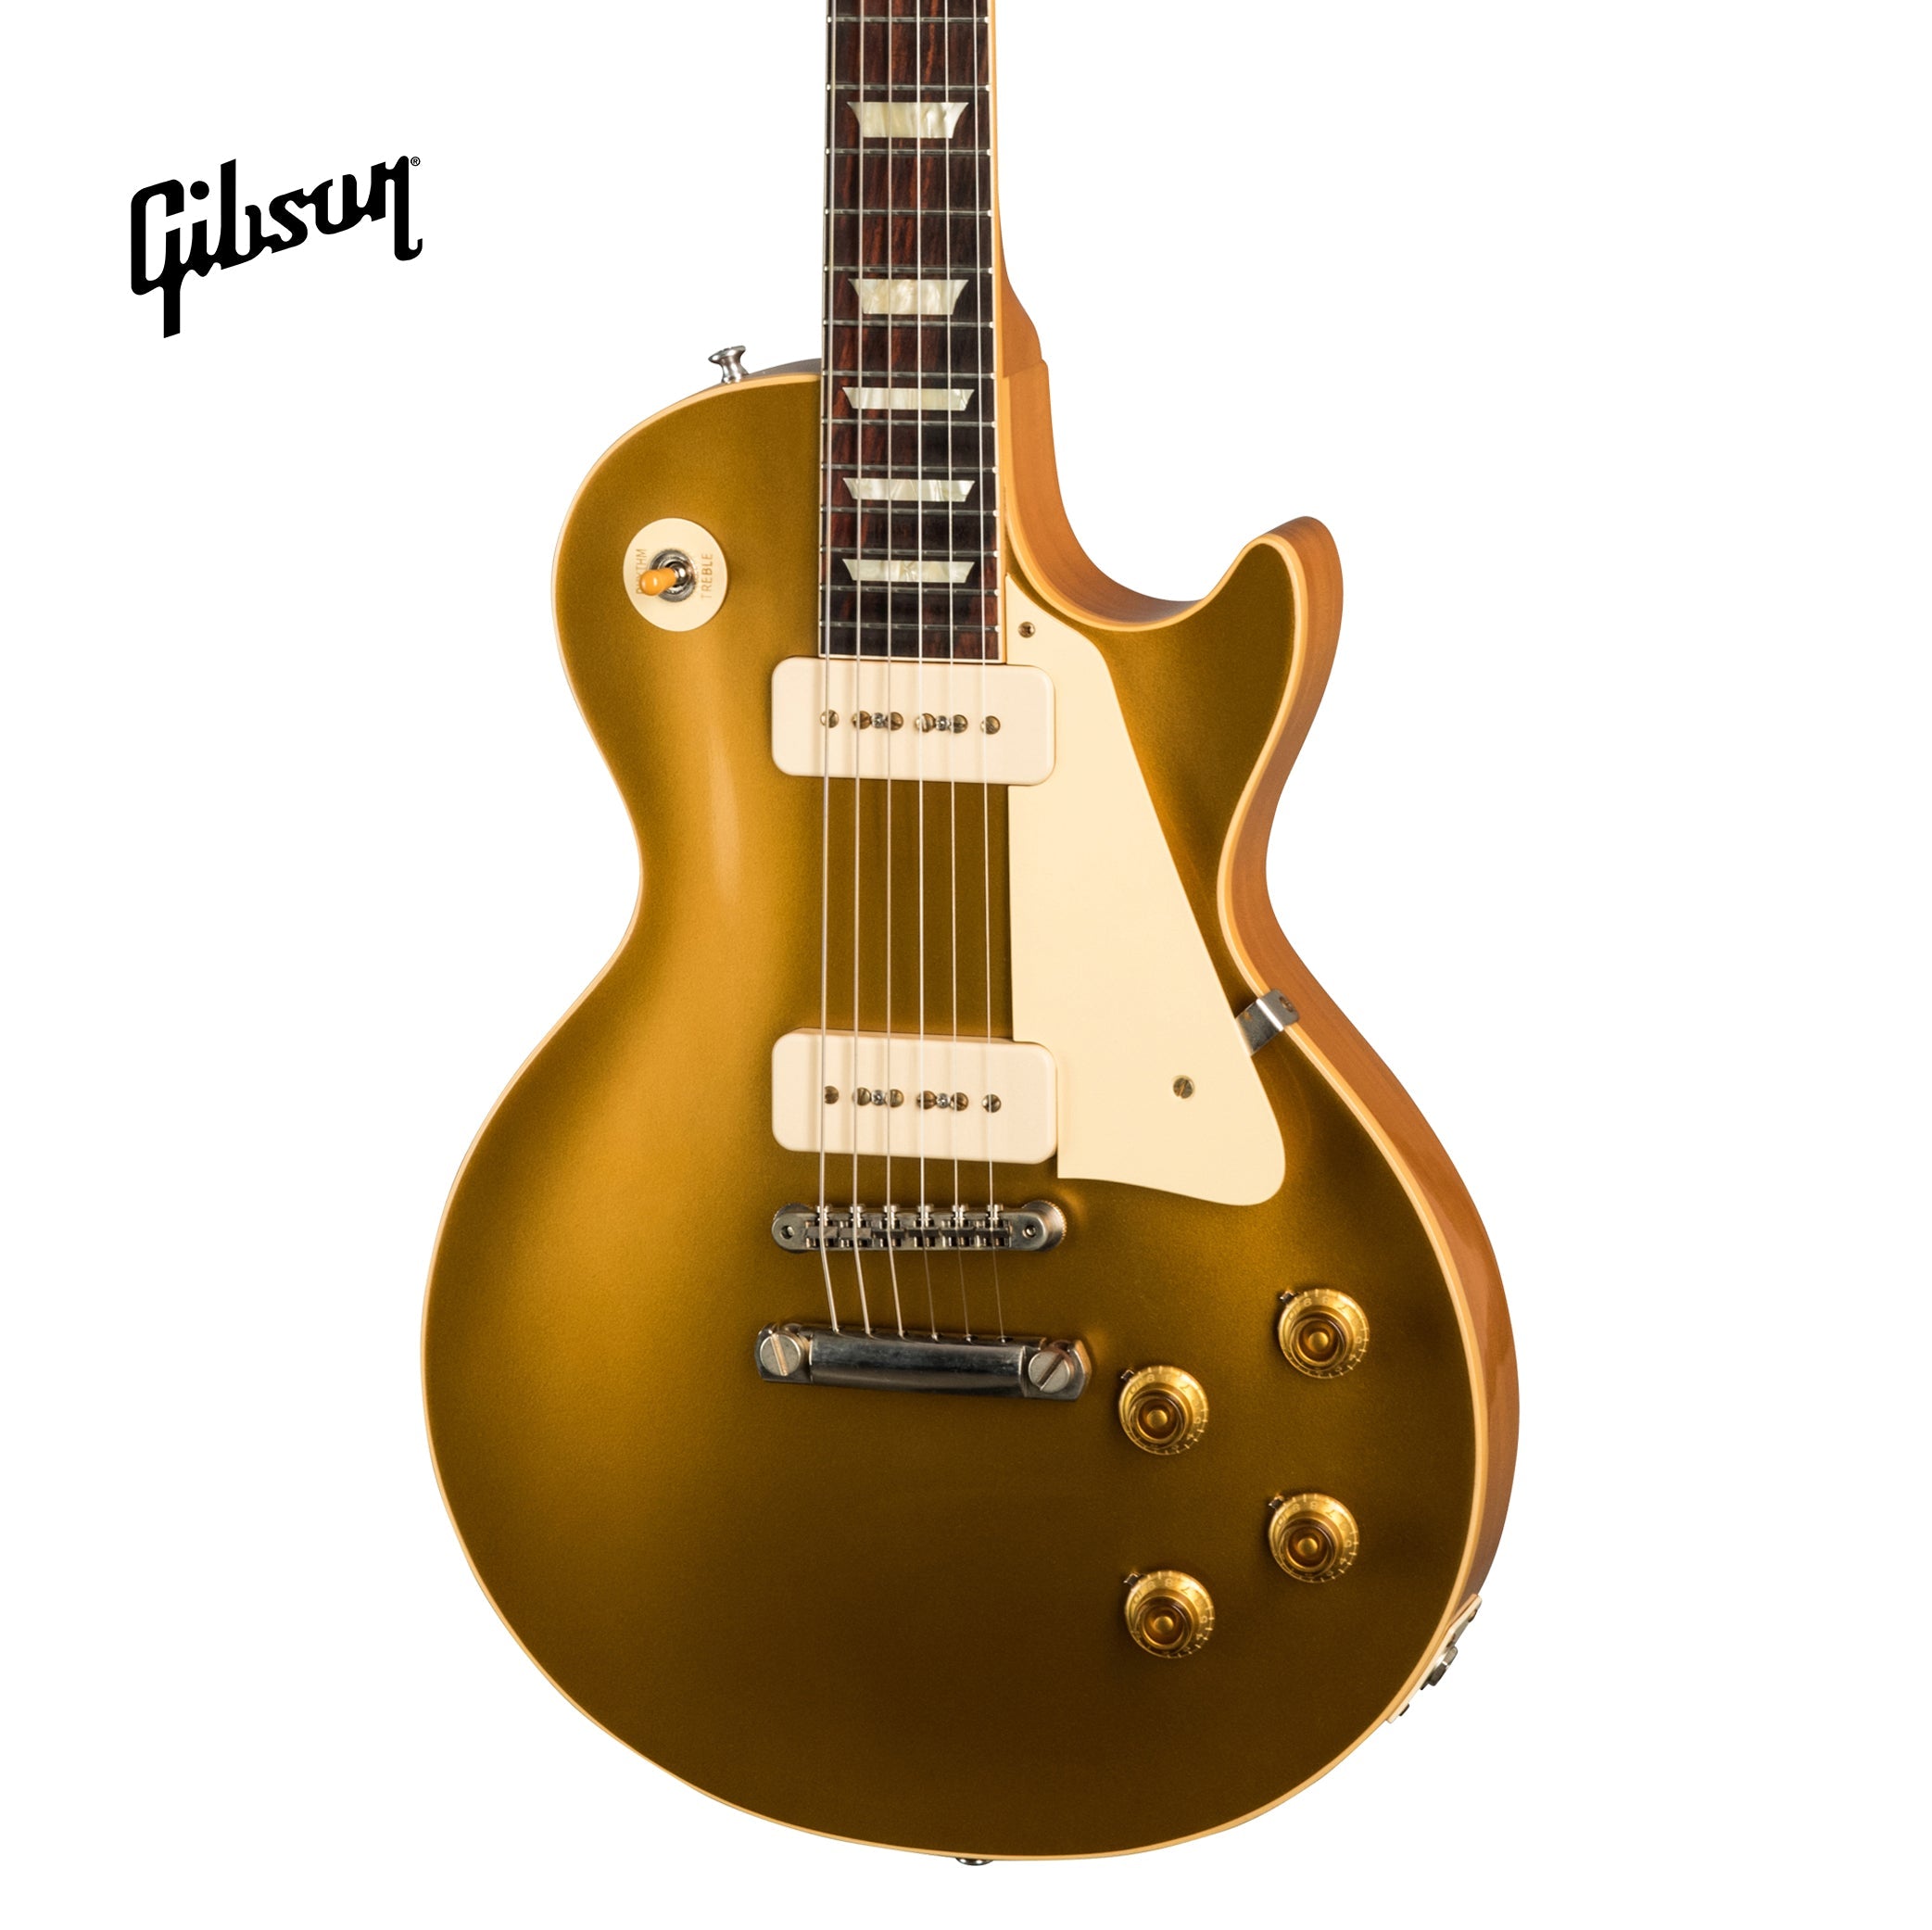 GIBSON 1956 LES PAUL GOLDTOP REISSUE VOS ELECTRIC GUITAR - DOUBLE GOLD